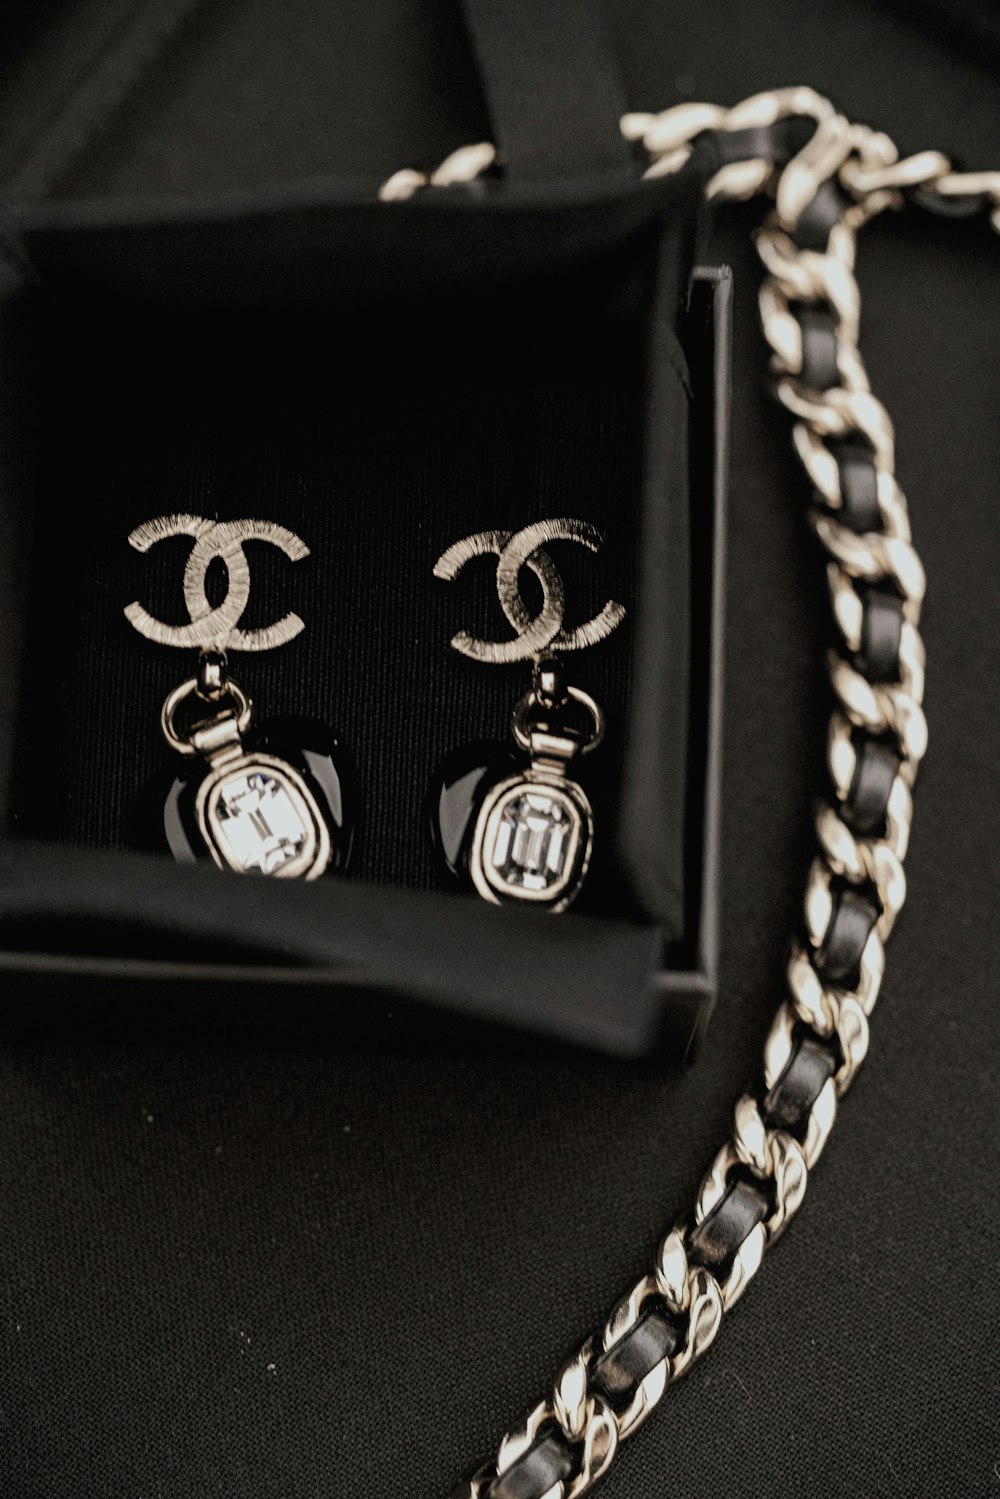 a pair of chanel earrings in a box